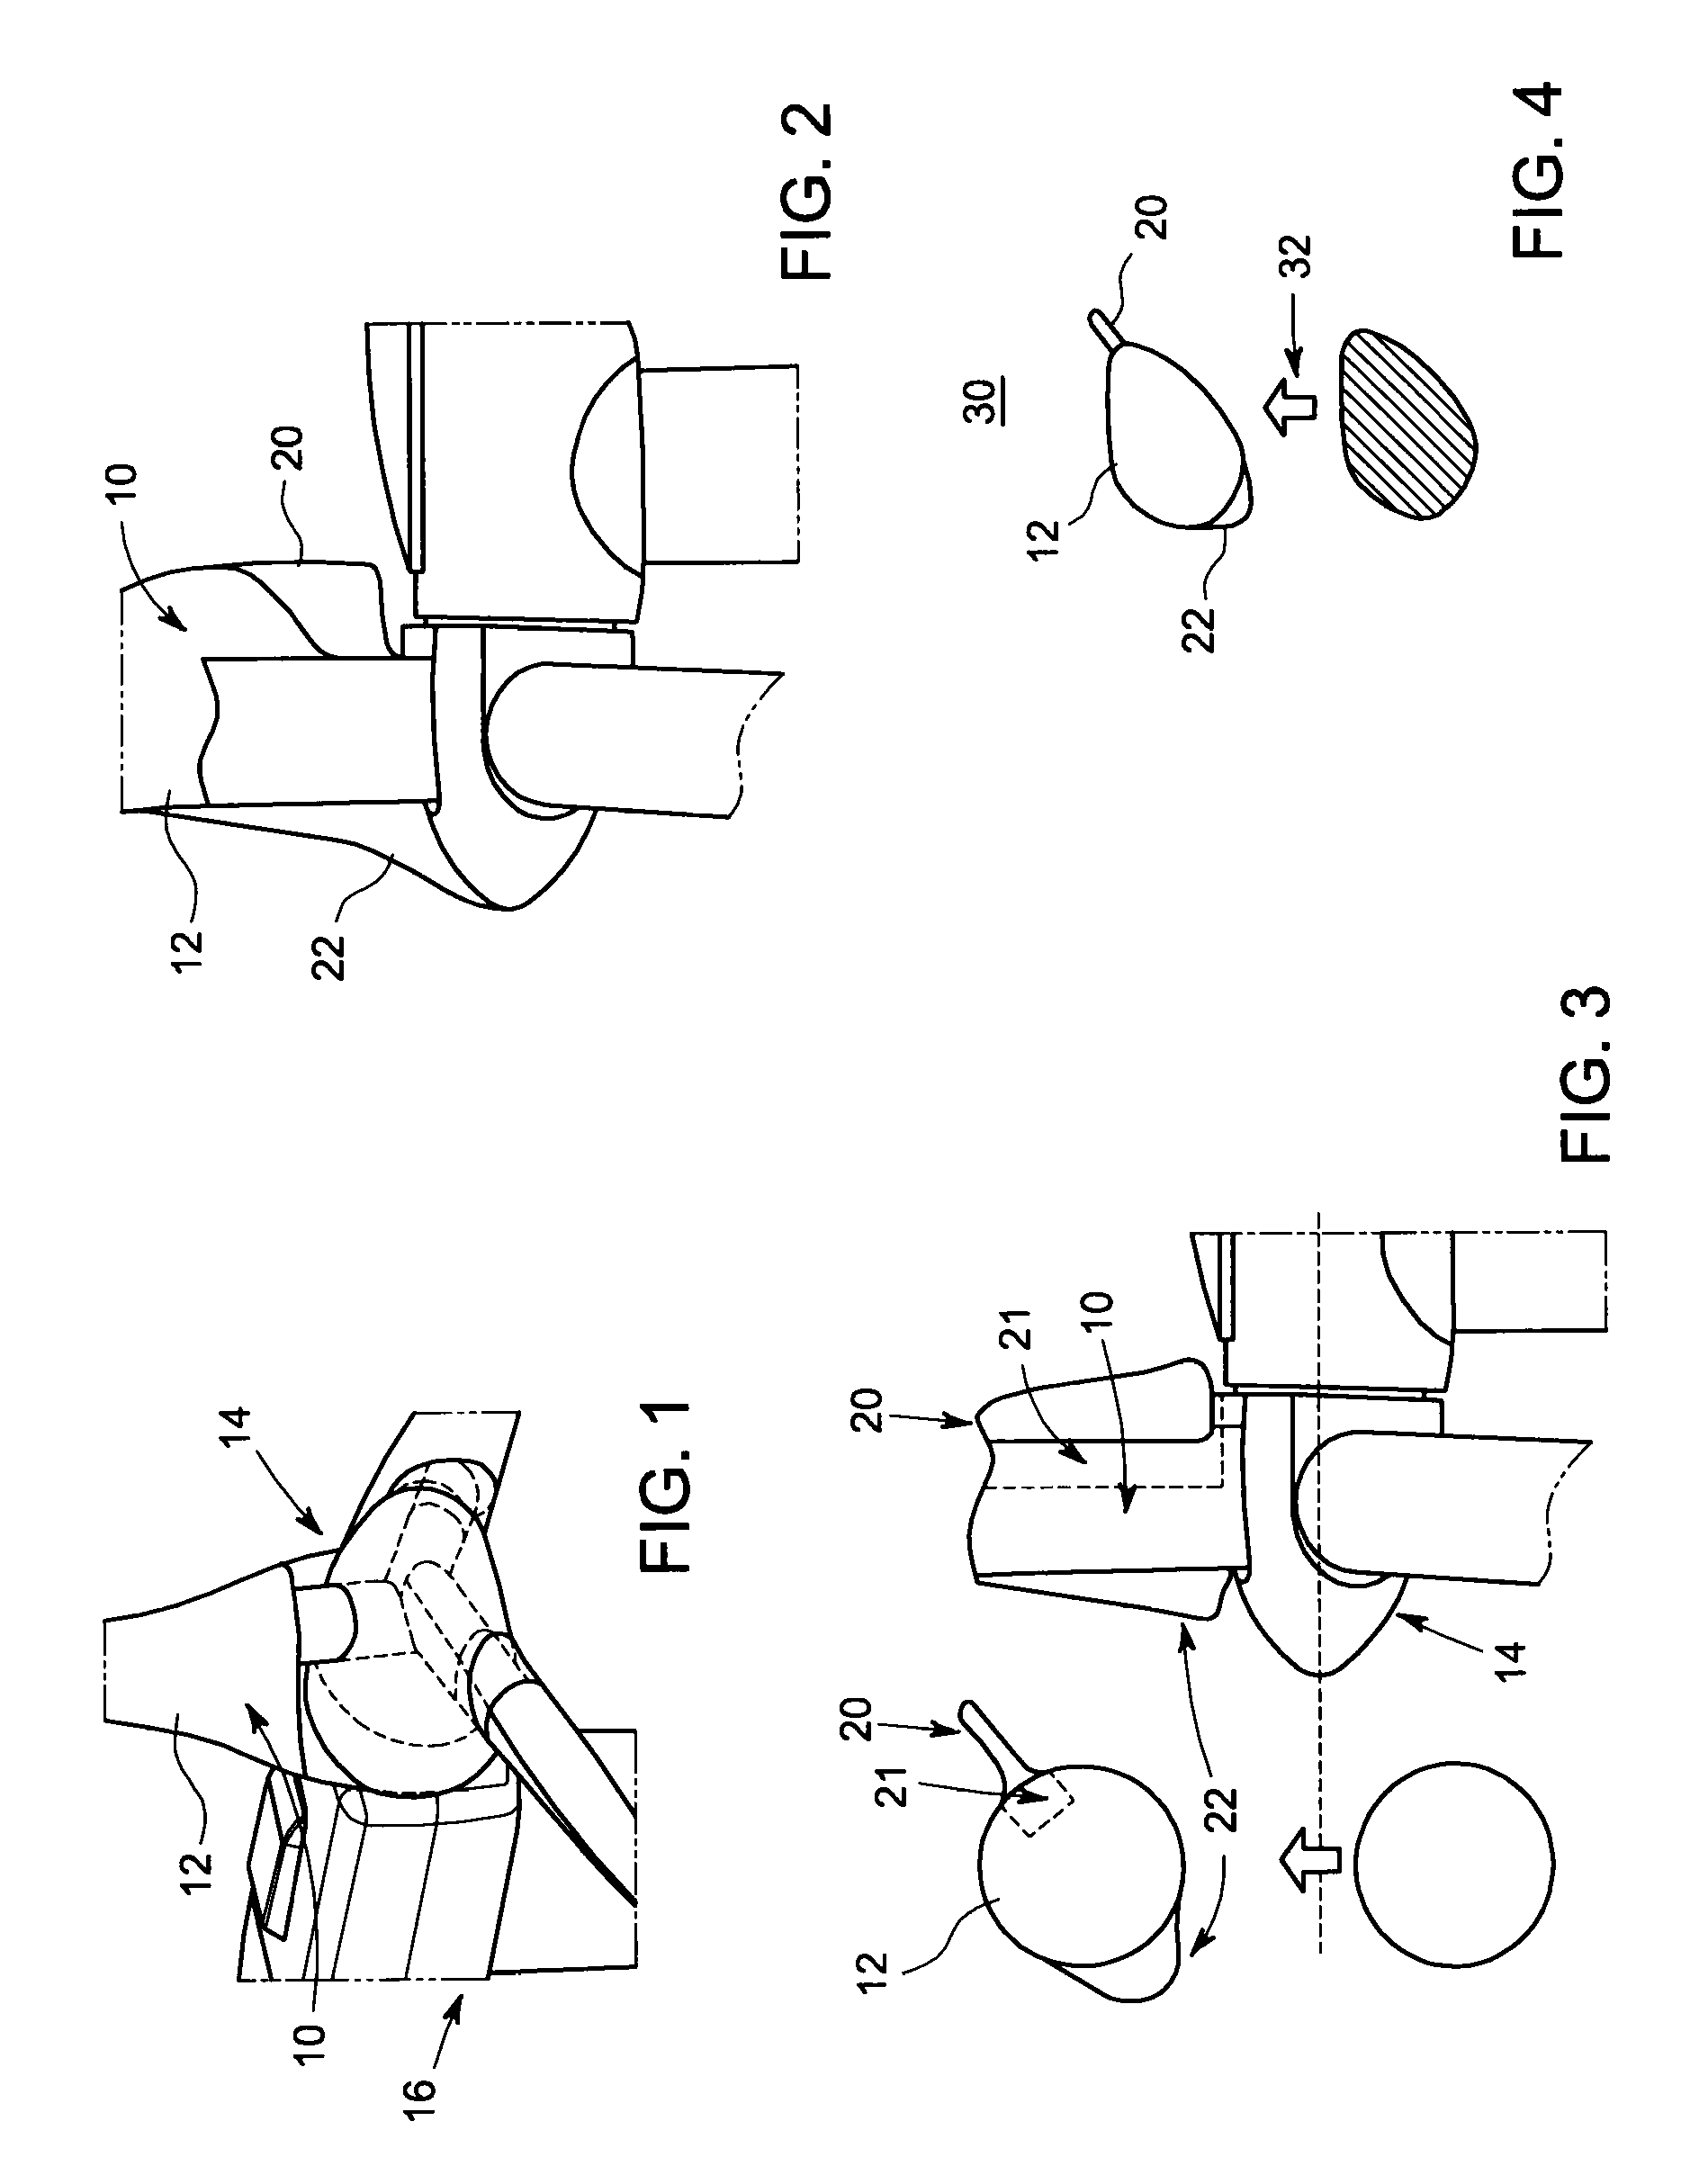 System and method for root loss reduction in wind turbine blades